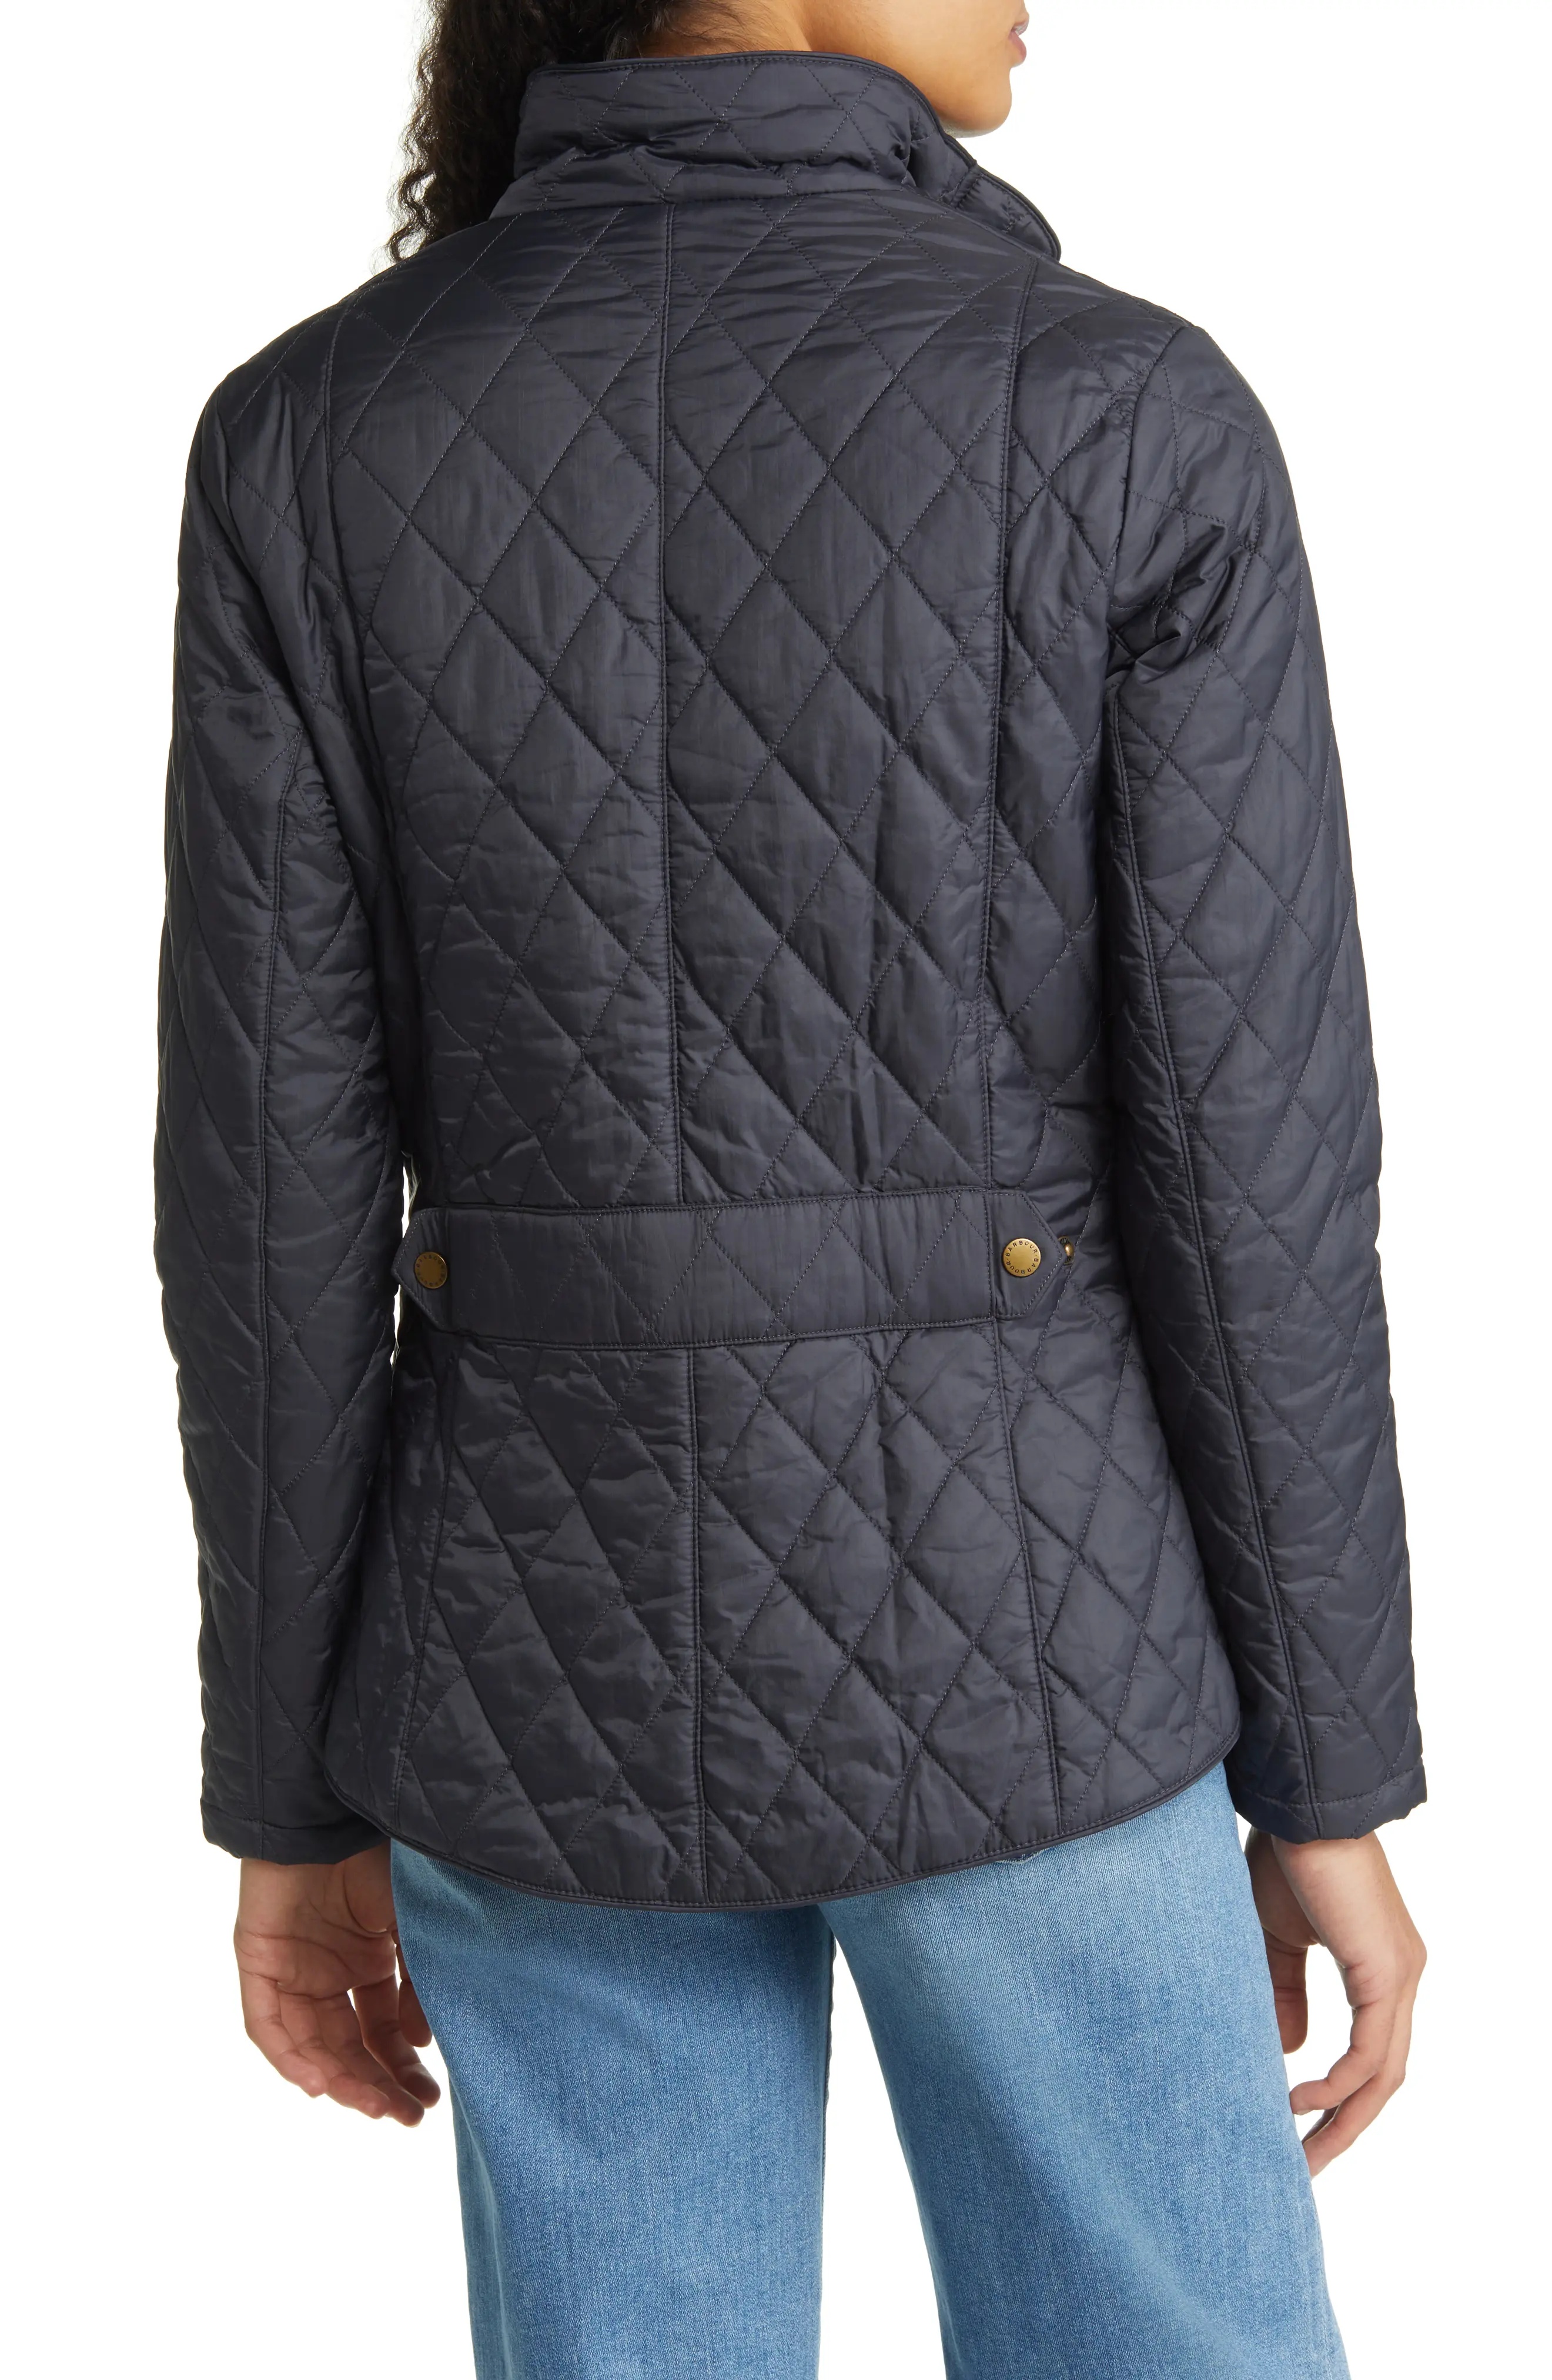 Flyweight Quilted Jacket - 2